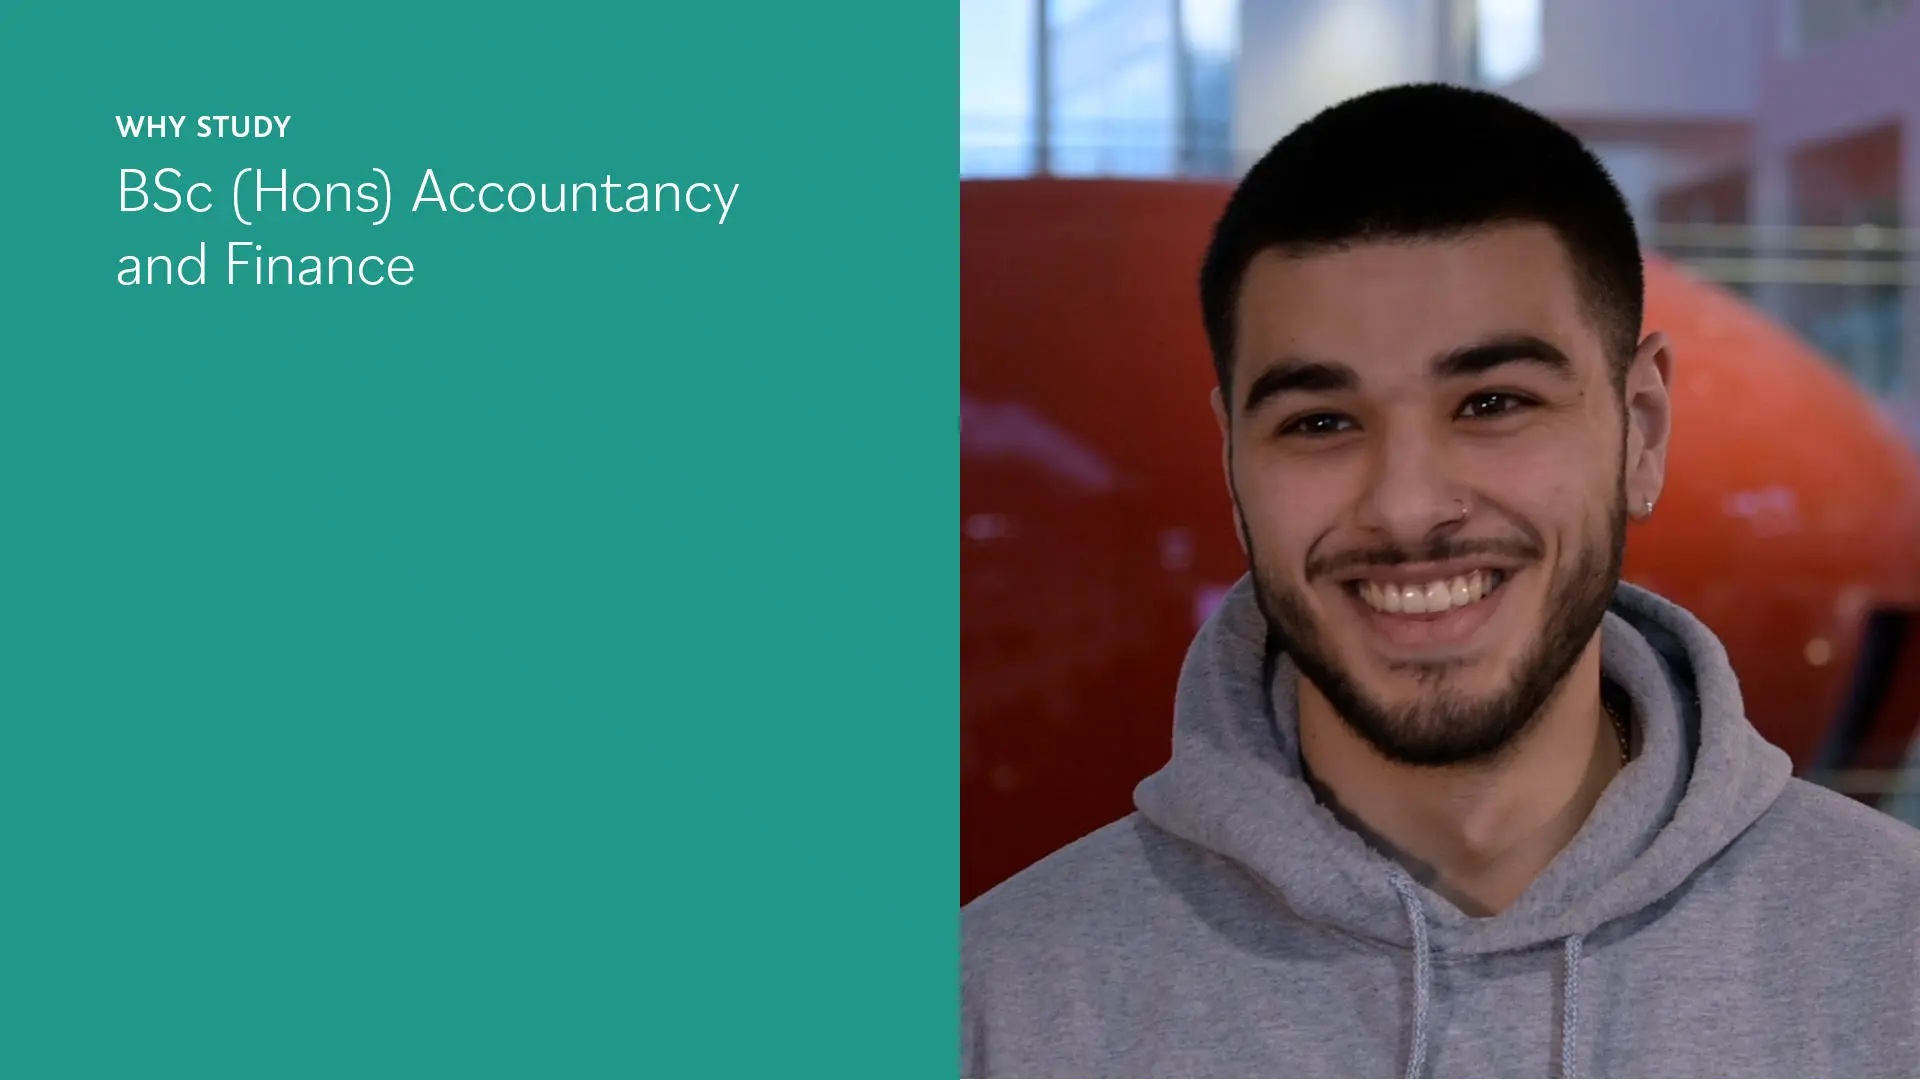 Image of accountancy student smiling to camera